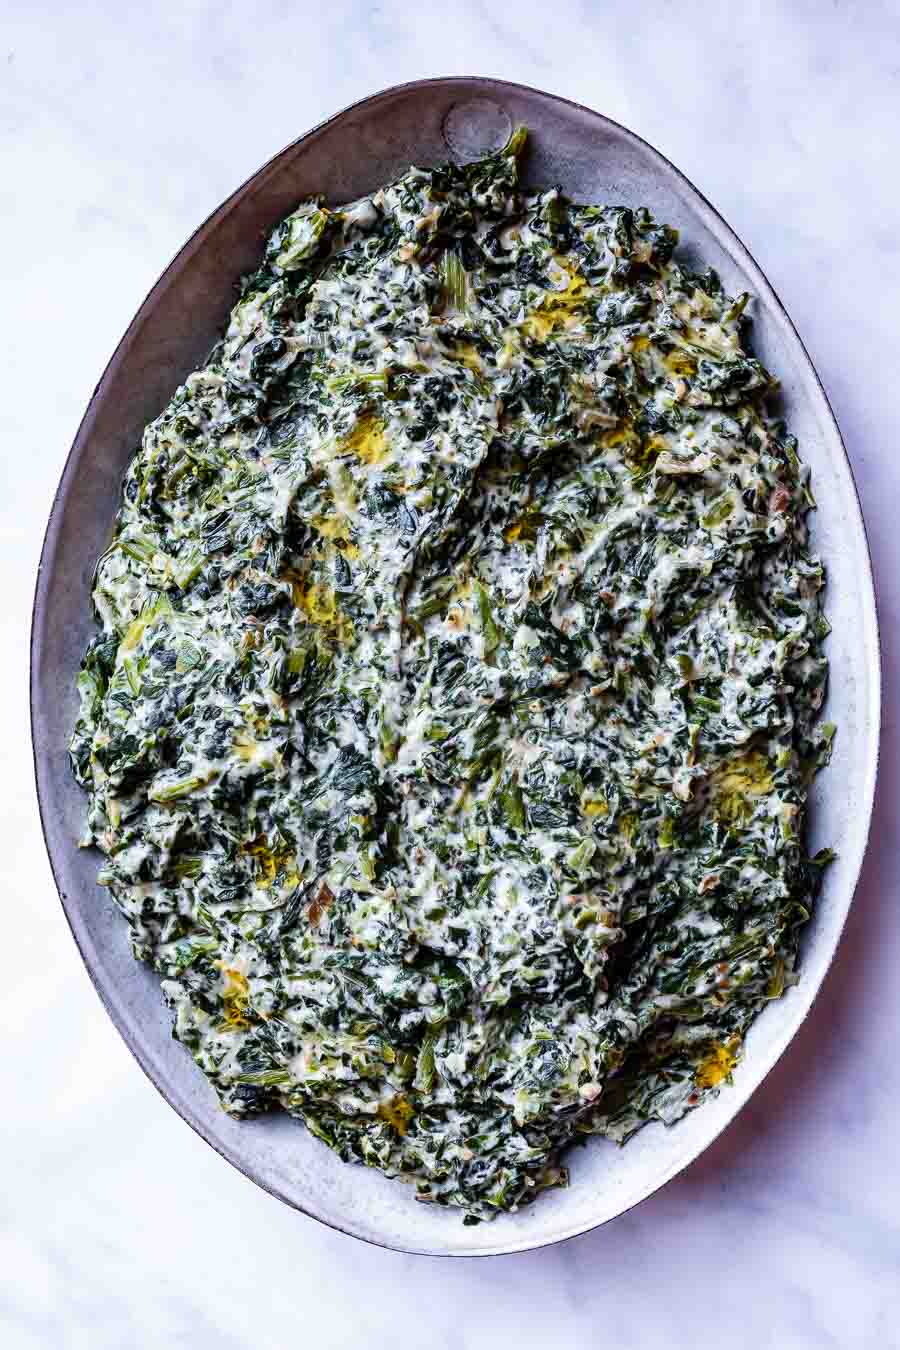 View form above of creamed spinach with coconut milk on a large grey oval serving plate. It is very green with a white sauce throughout. The plate is on a white counter.